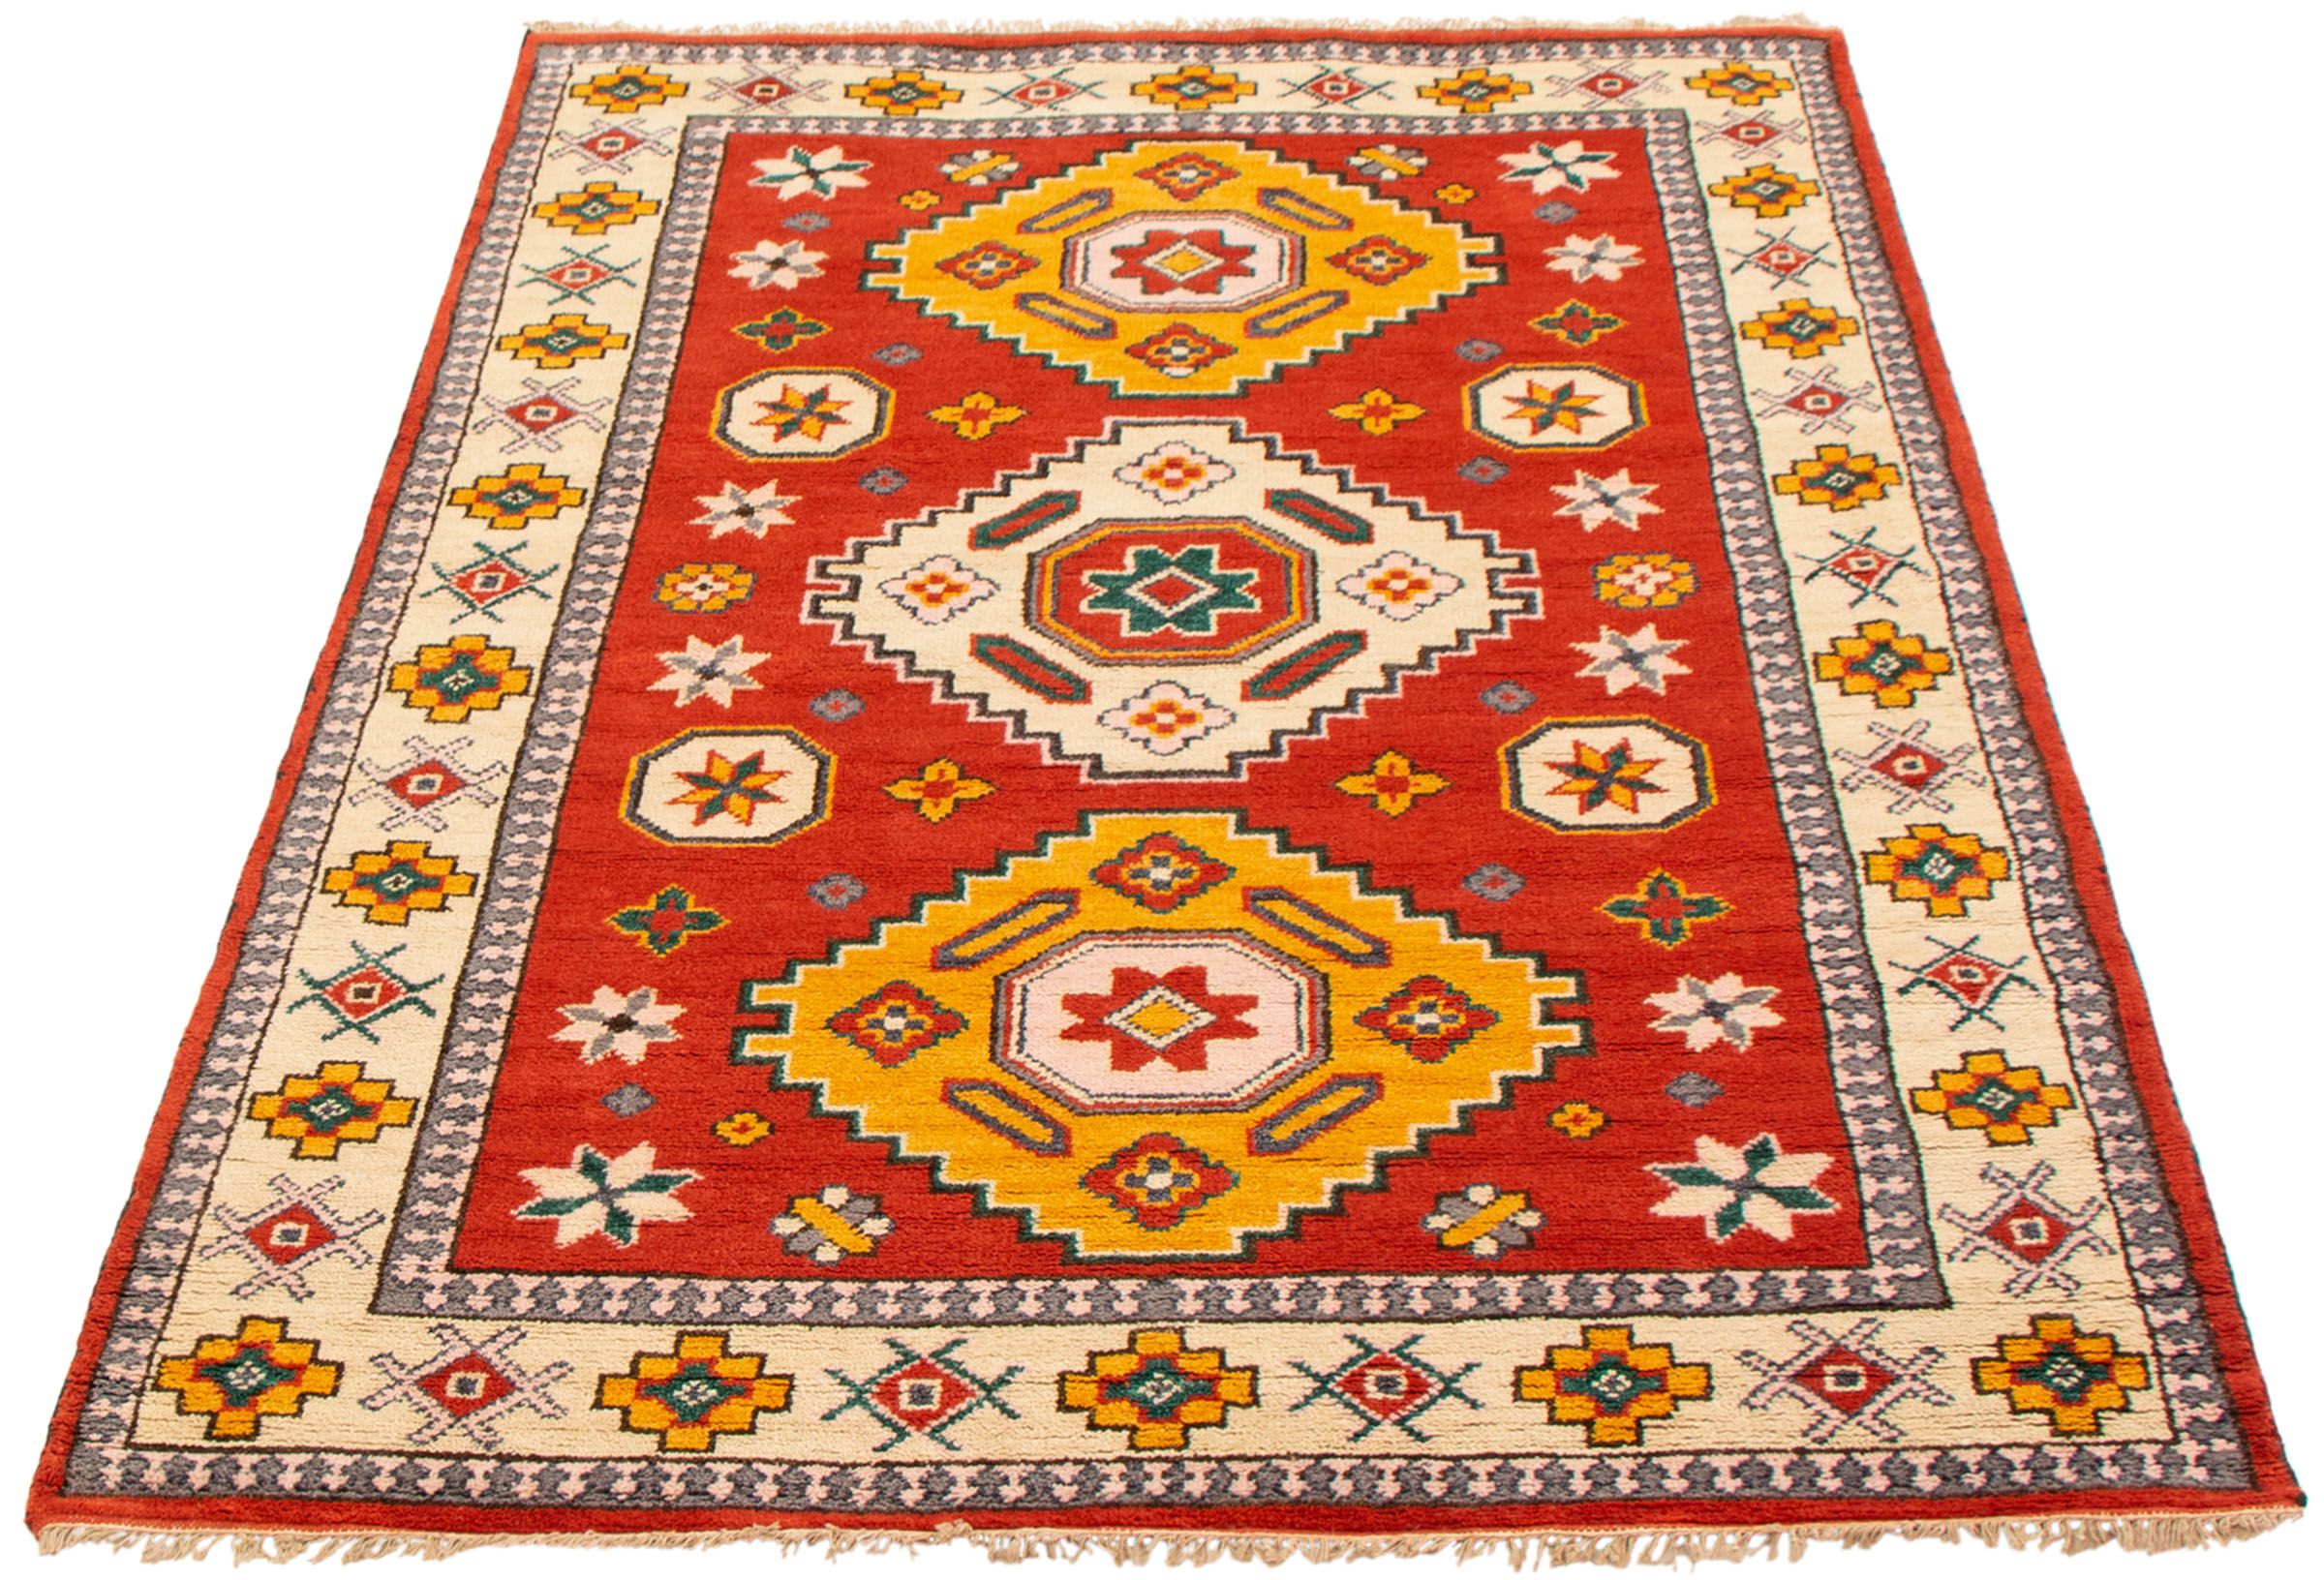 Finest Khal Mohammadi Bordered Red Rug 5'9 x 8'0 Hand-Knotted Wool Rug eCarpet Gallery Area Rug for Living Room Bedroom 360410 